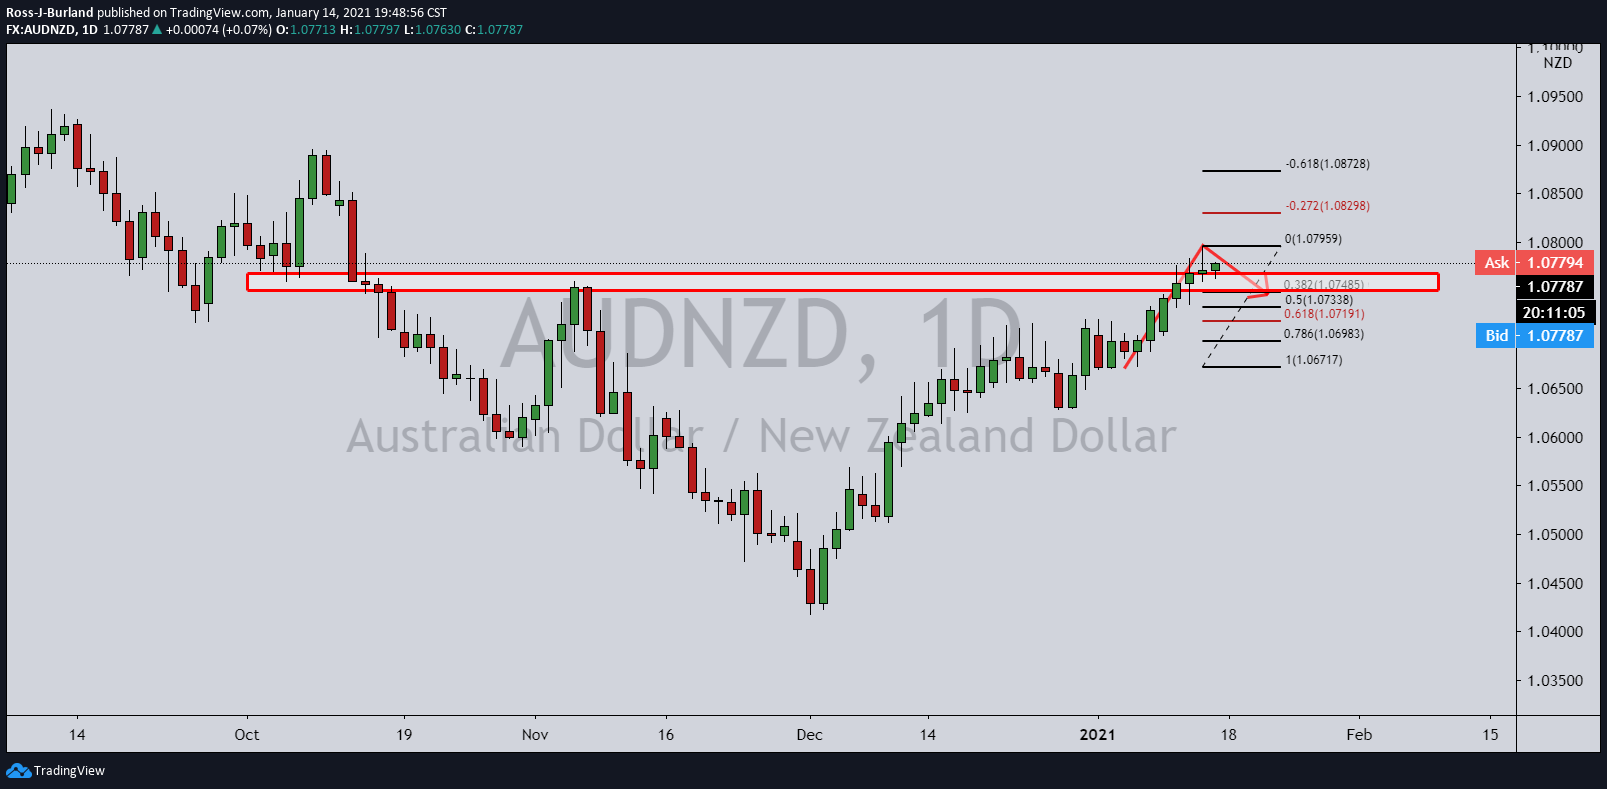 AUD/NZD Price Analysis: Finally, a turning point in the 4-HR W-formation